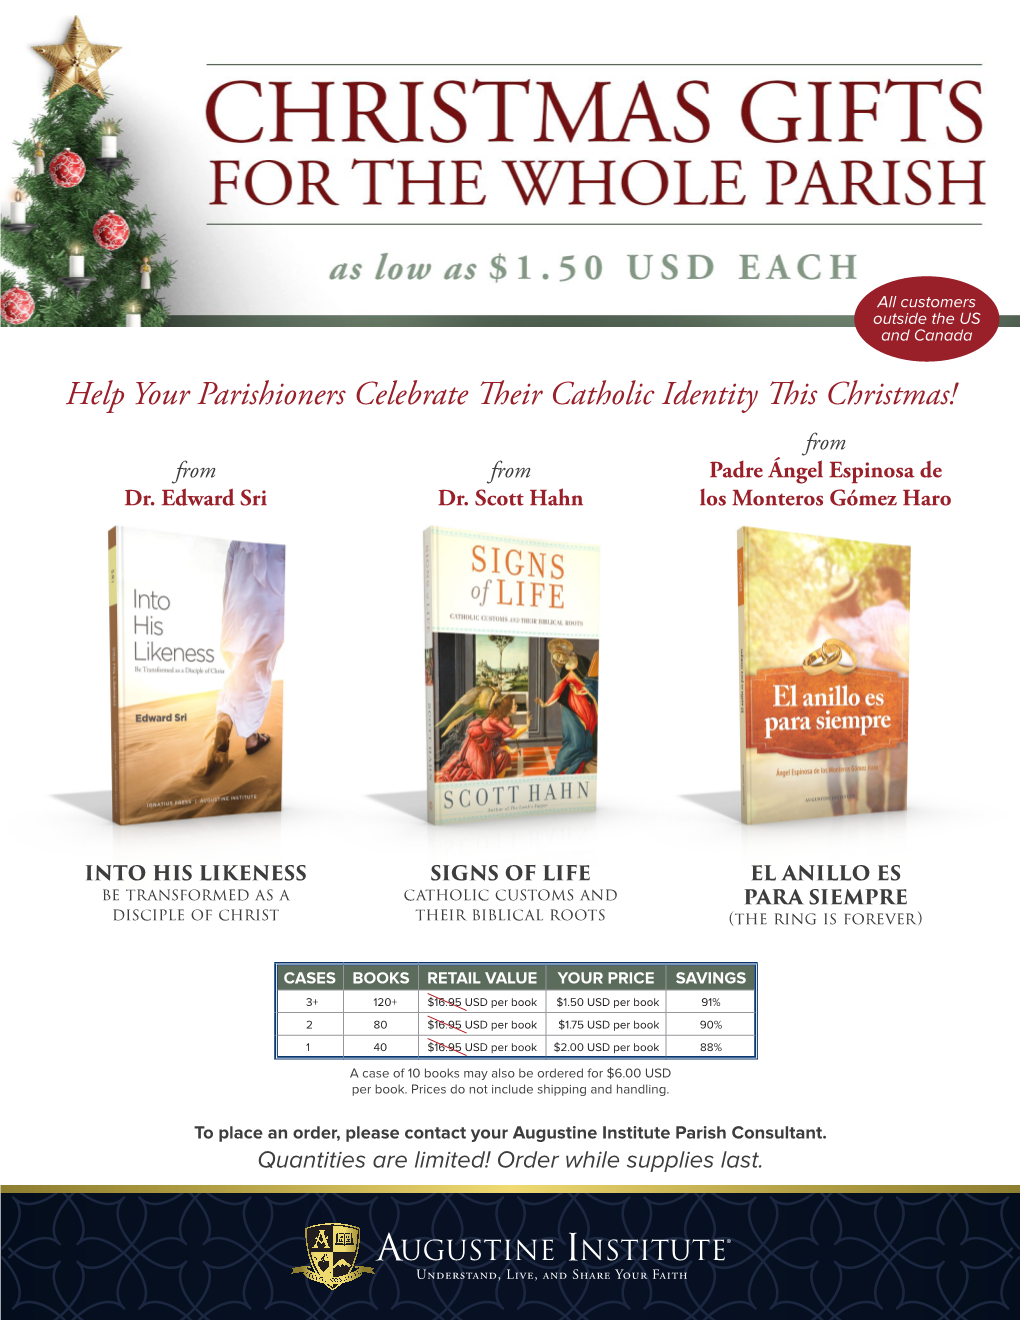 Help Your Parishioners Celebrate Their Catholic Identity This Christmas! from from from Padre Ángel Espinosa De Dr